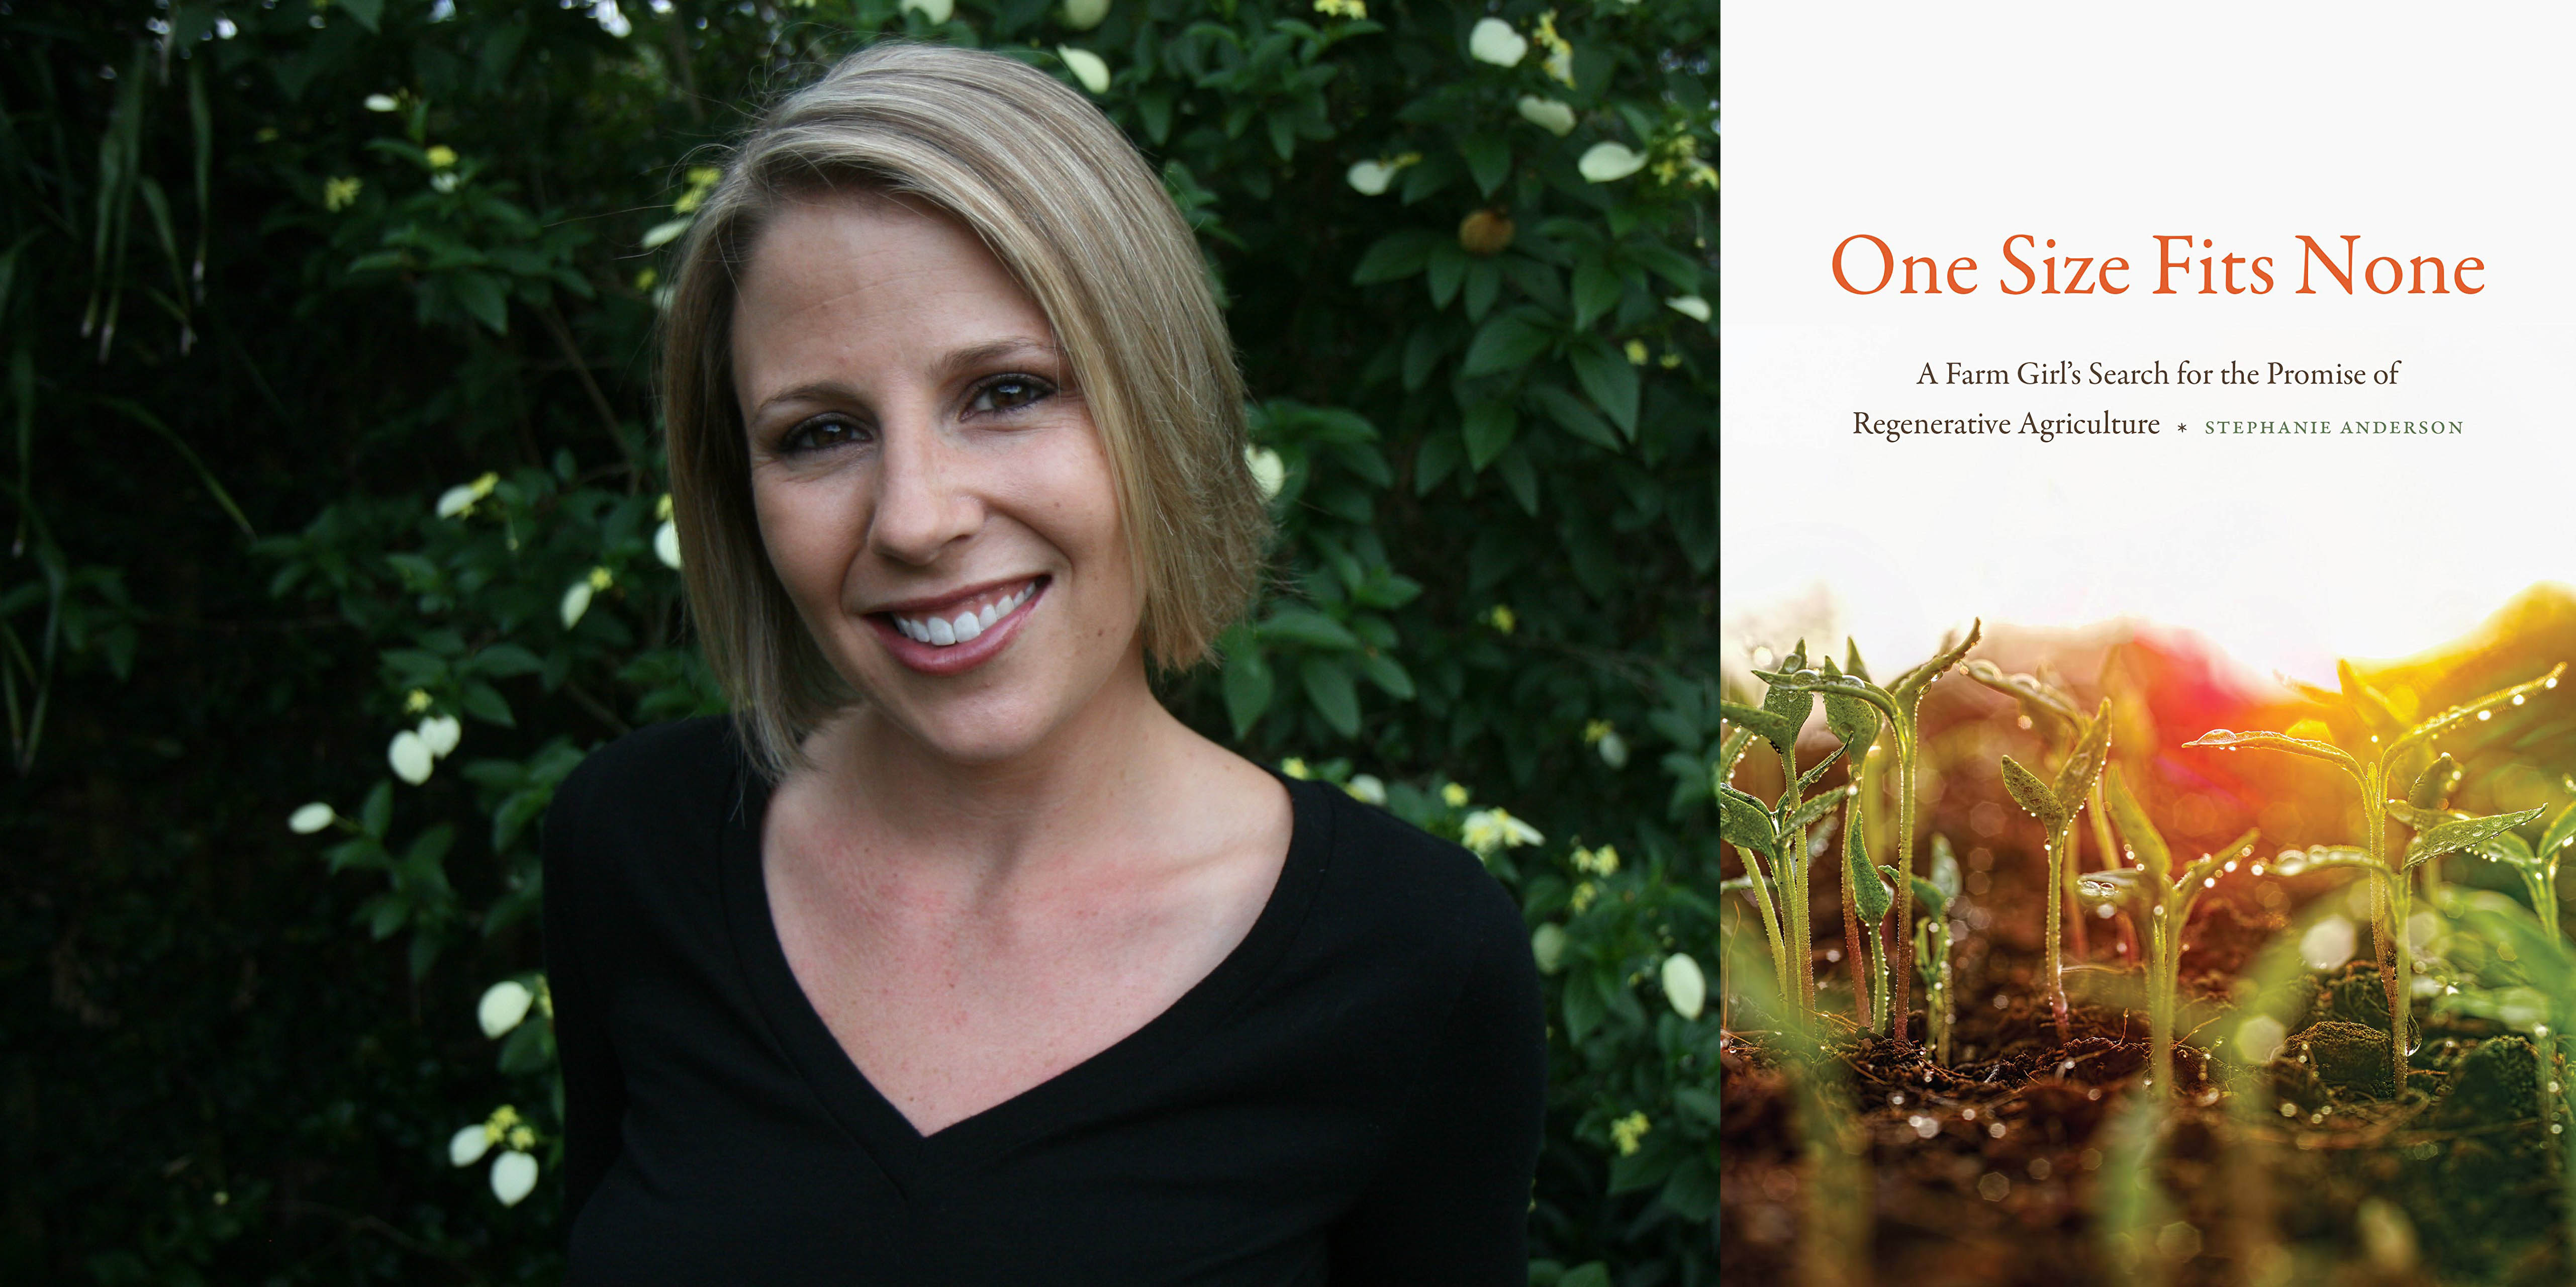 One Size Fits None: A Farm Girl’s Search for the Promise of Regenerative Agriculture (2019) by Stephanie Anderson